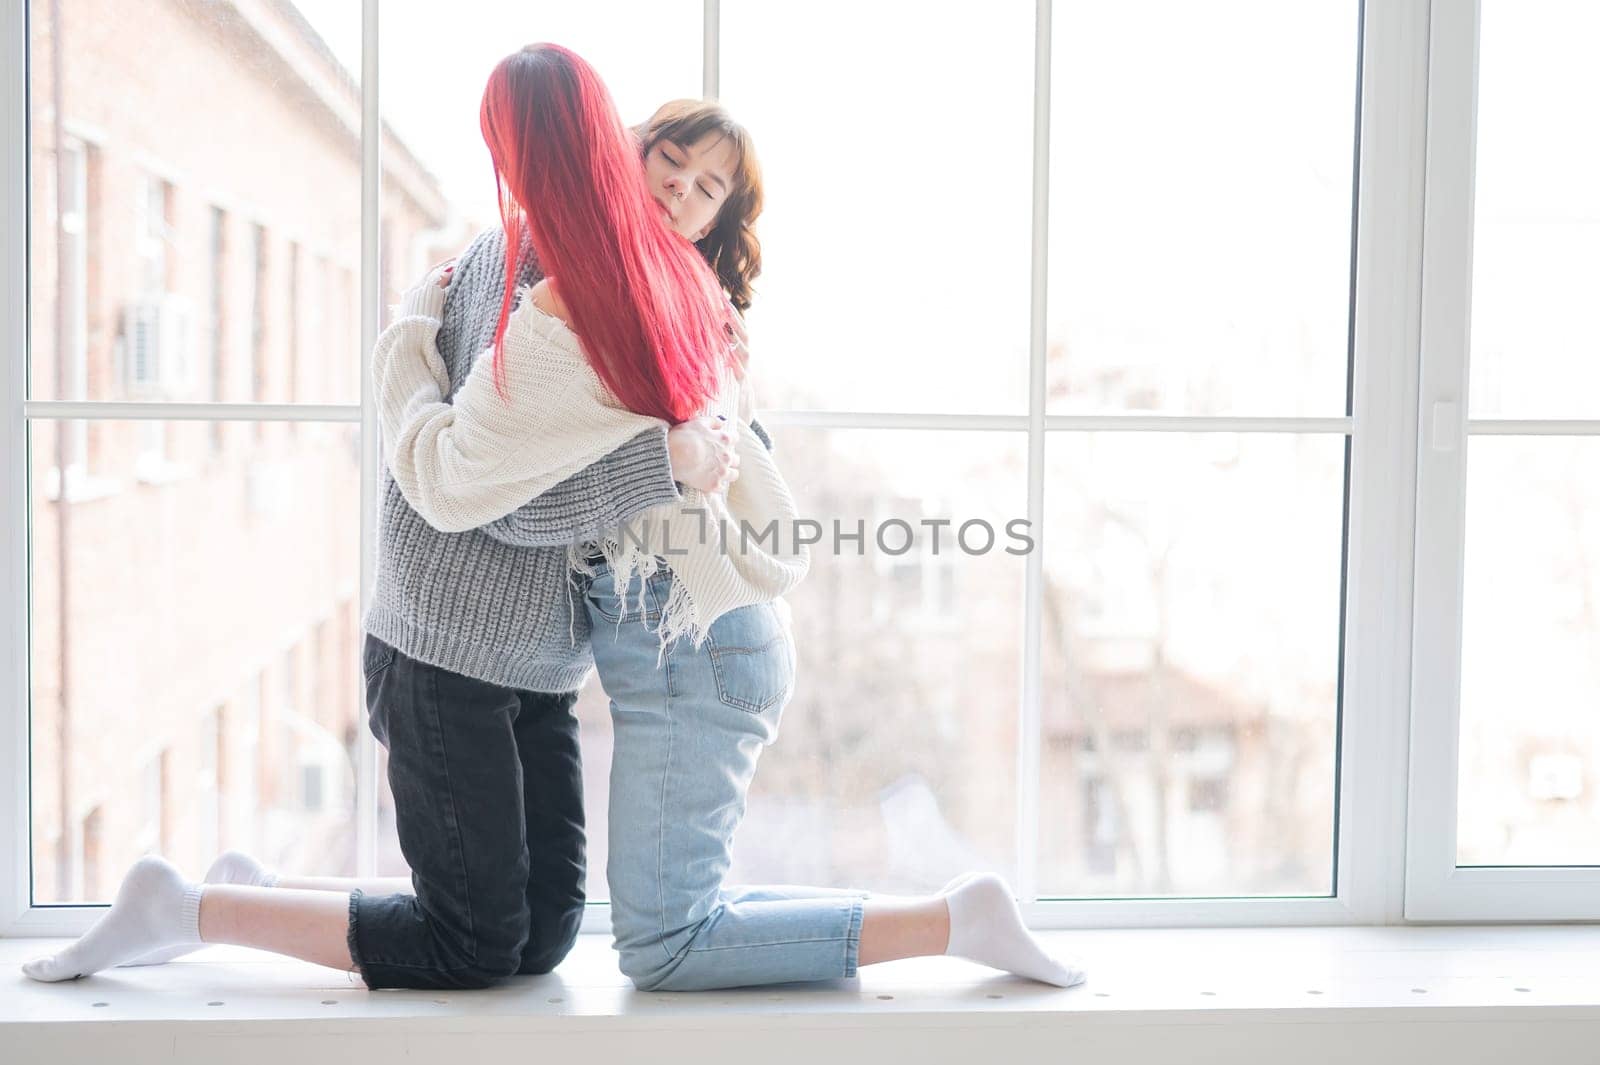 Two women dressed in sweaters sit by the window and gently hug. Lesbian intimacy. by mrwed54